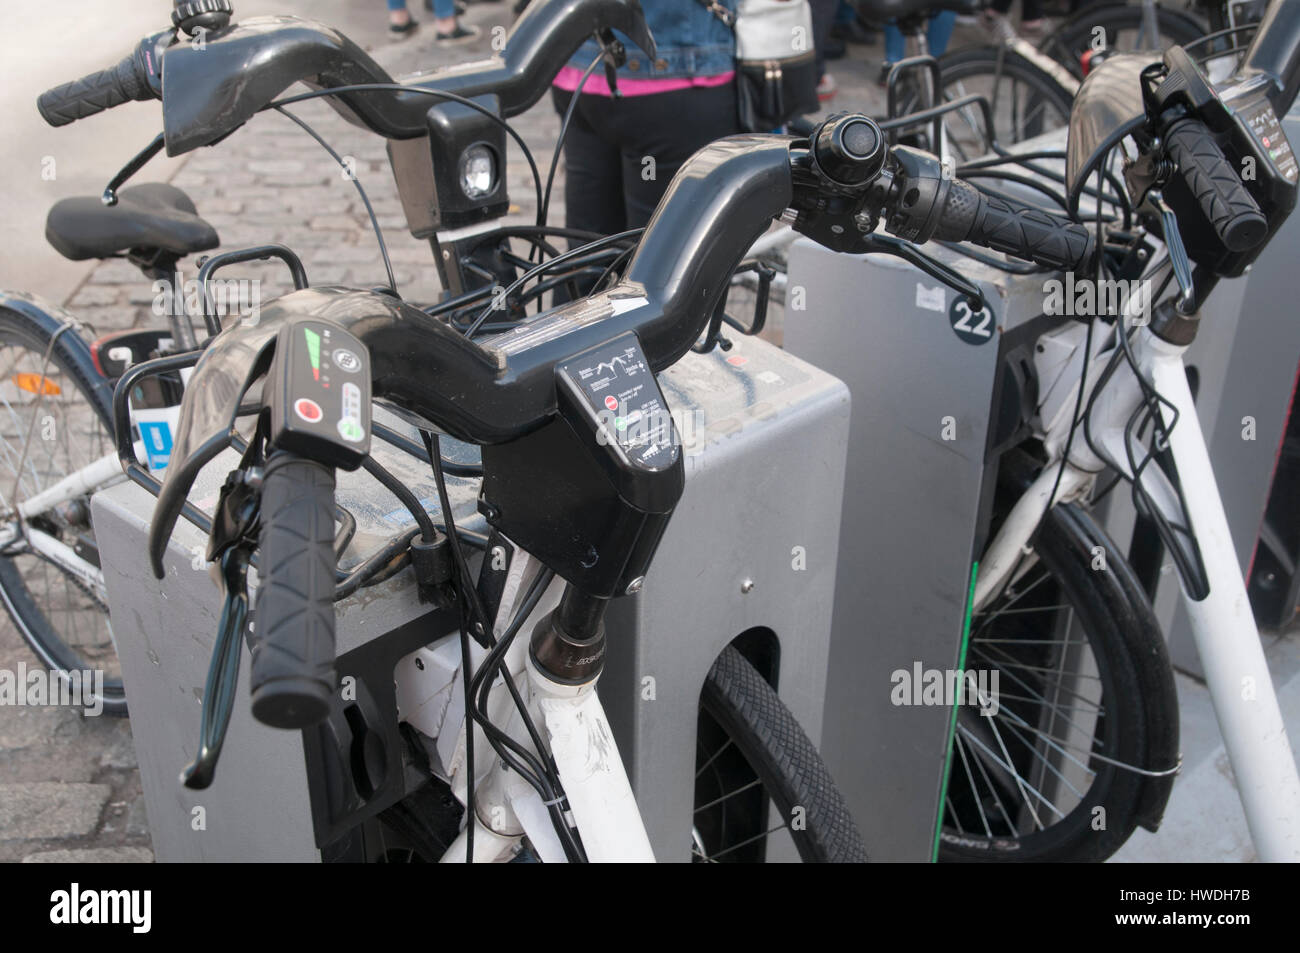 BiciMad Madrid city bicycle rental station at Puerta del sol, Madrid, Spain Stock Photo